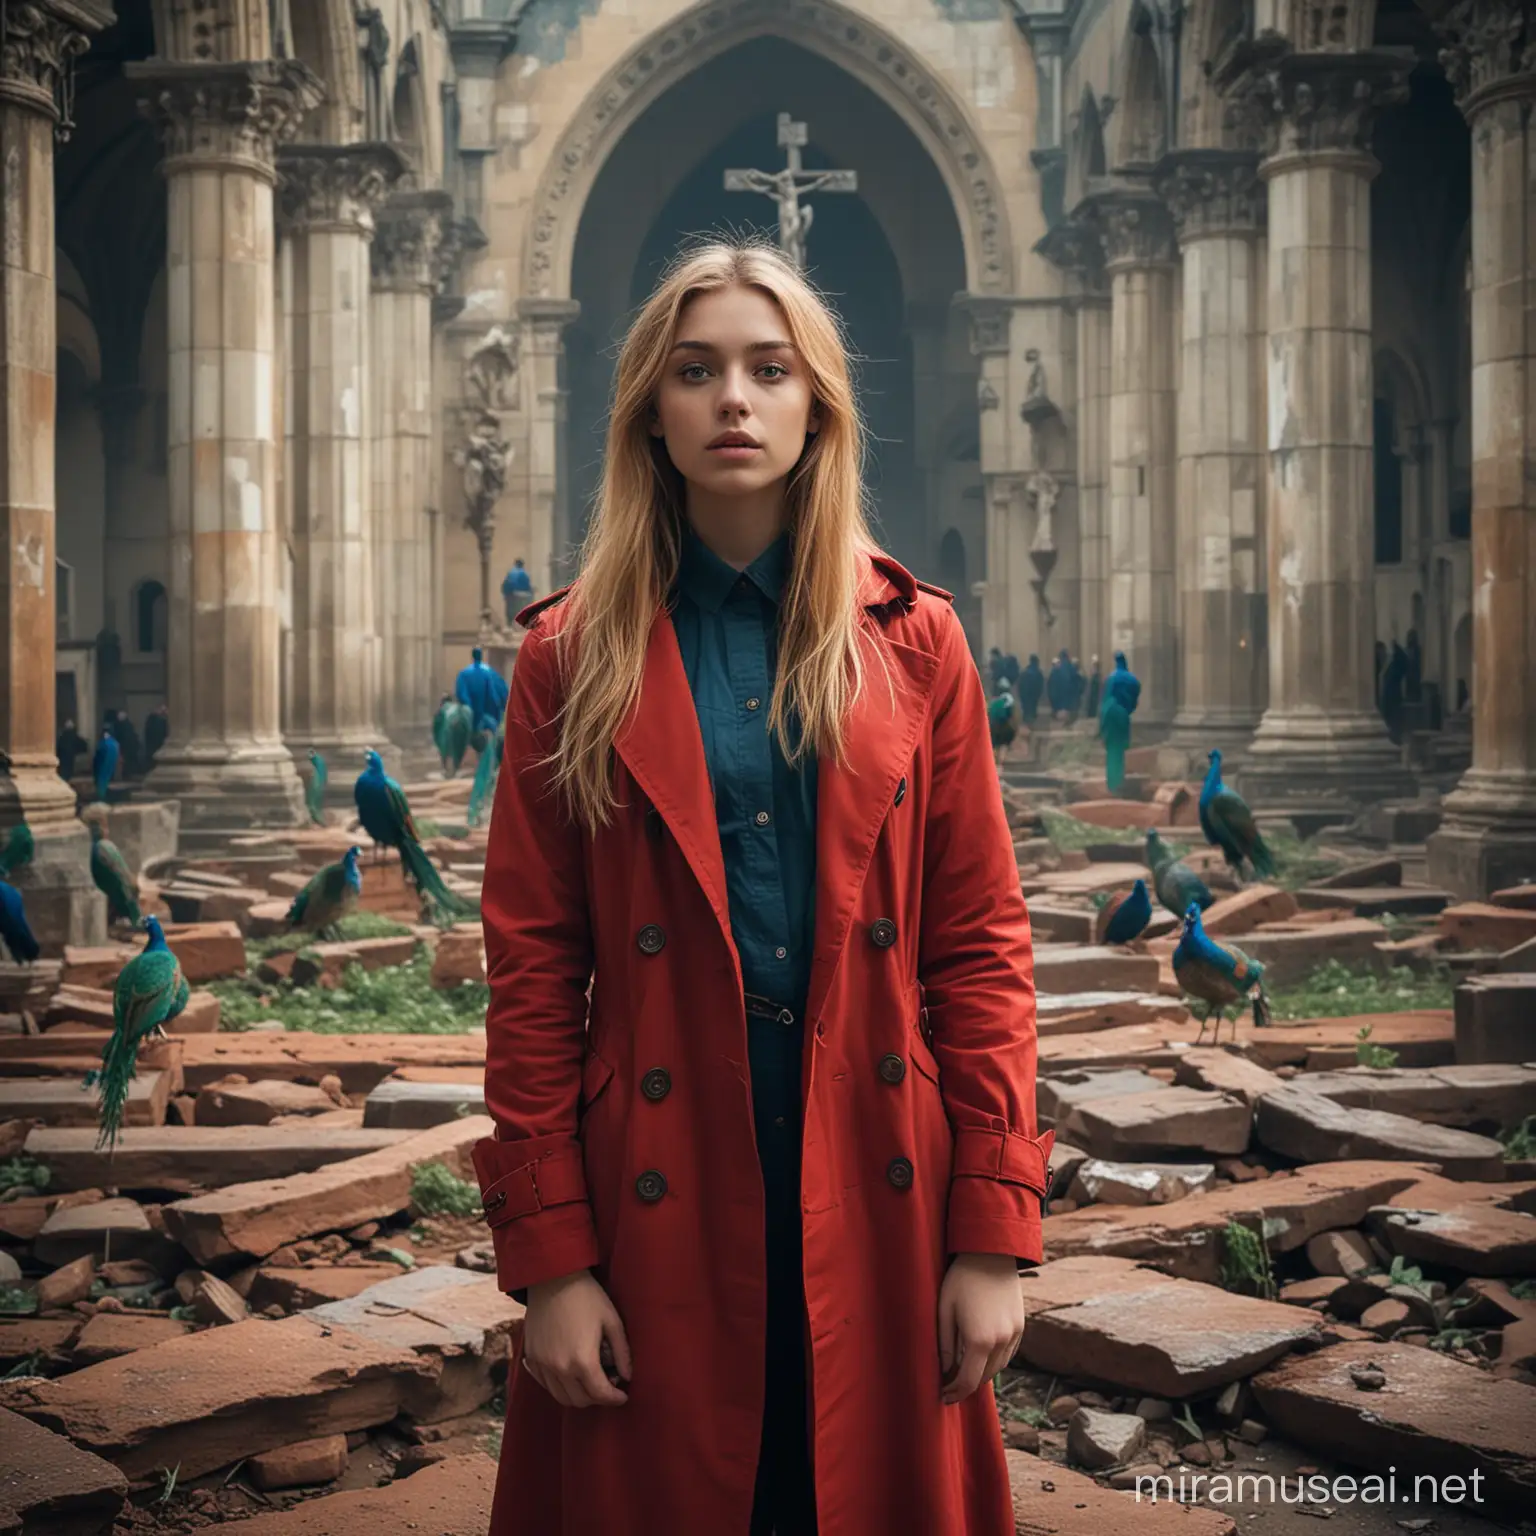 Mystical Teenage Goddess in Crimson Coat with Peacock Amidst Cathedral Ruins